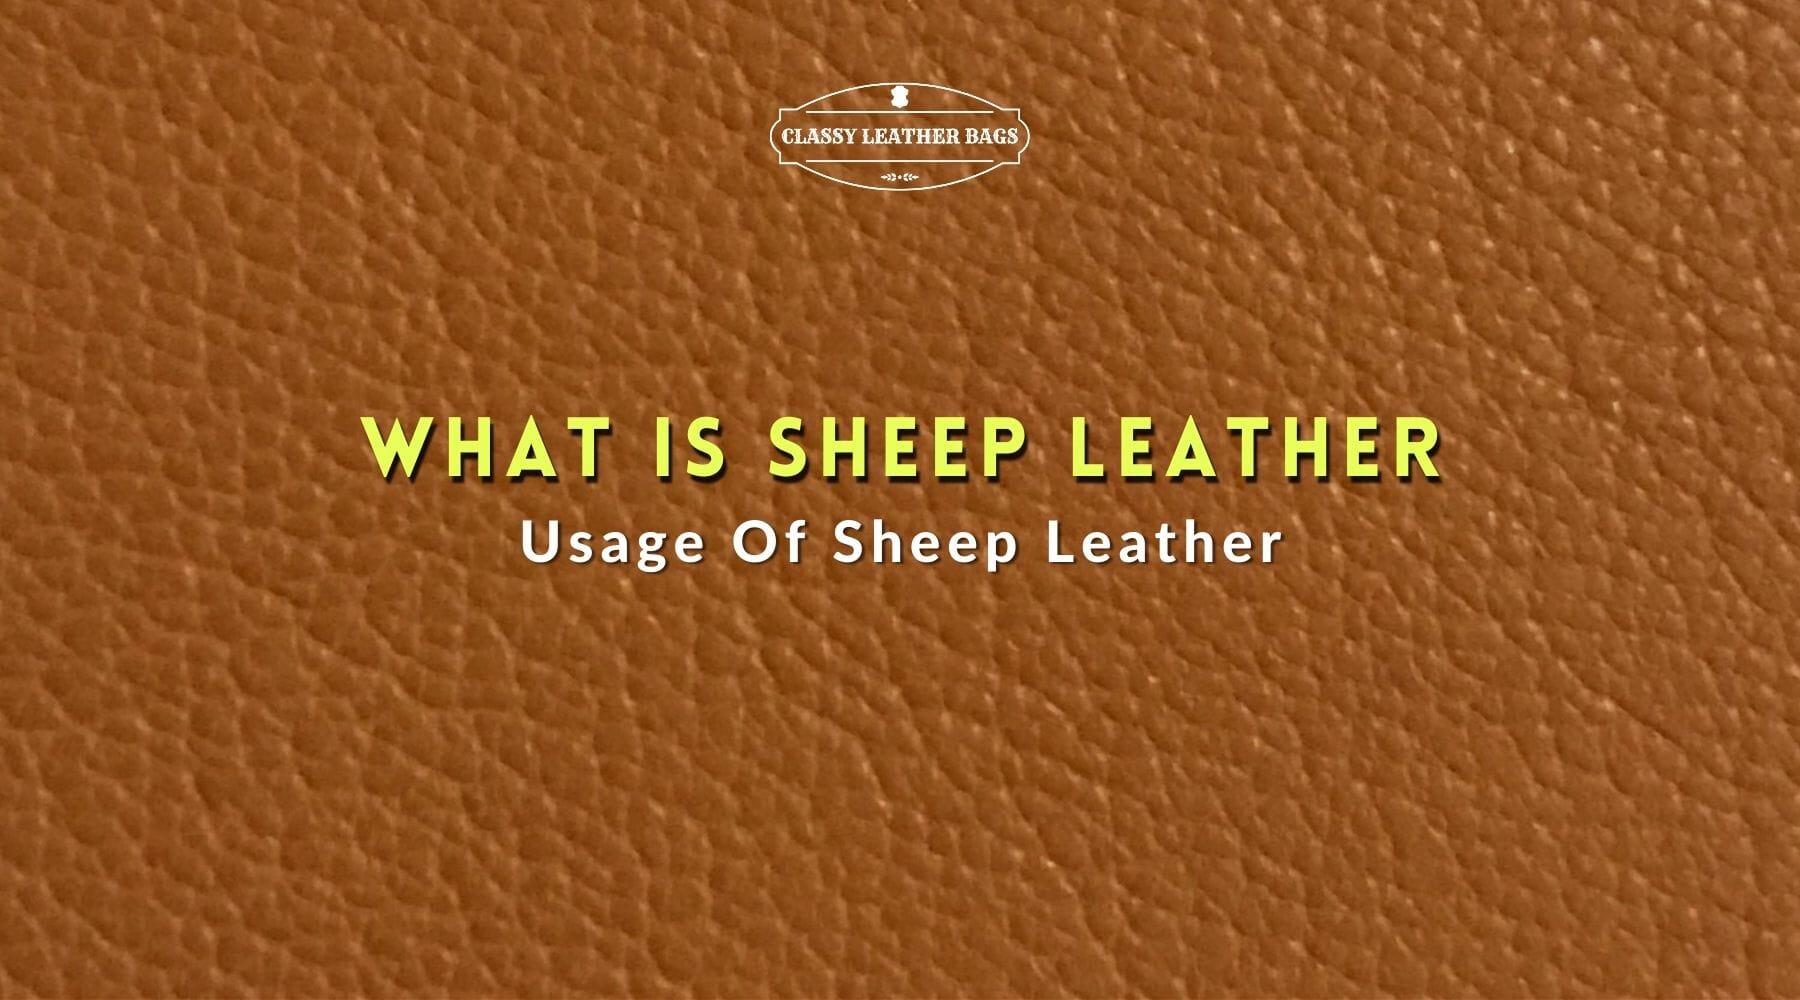 what is sheep leather?